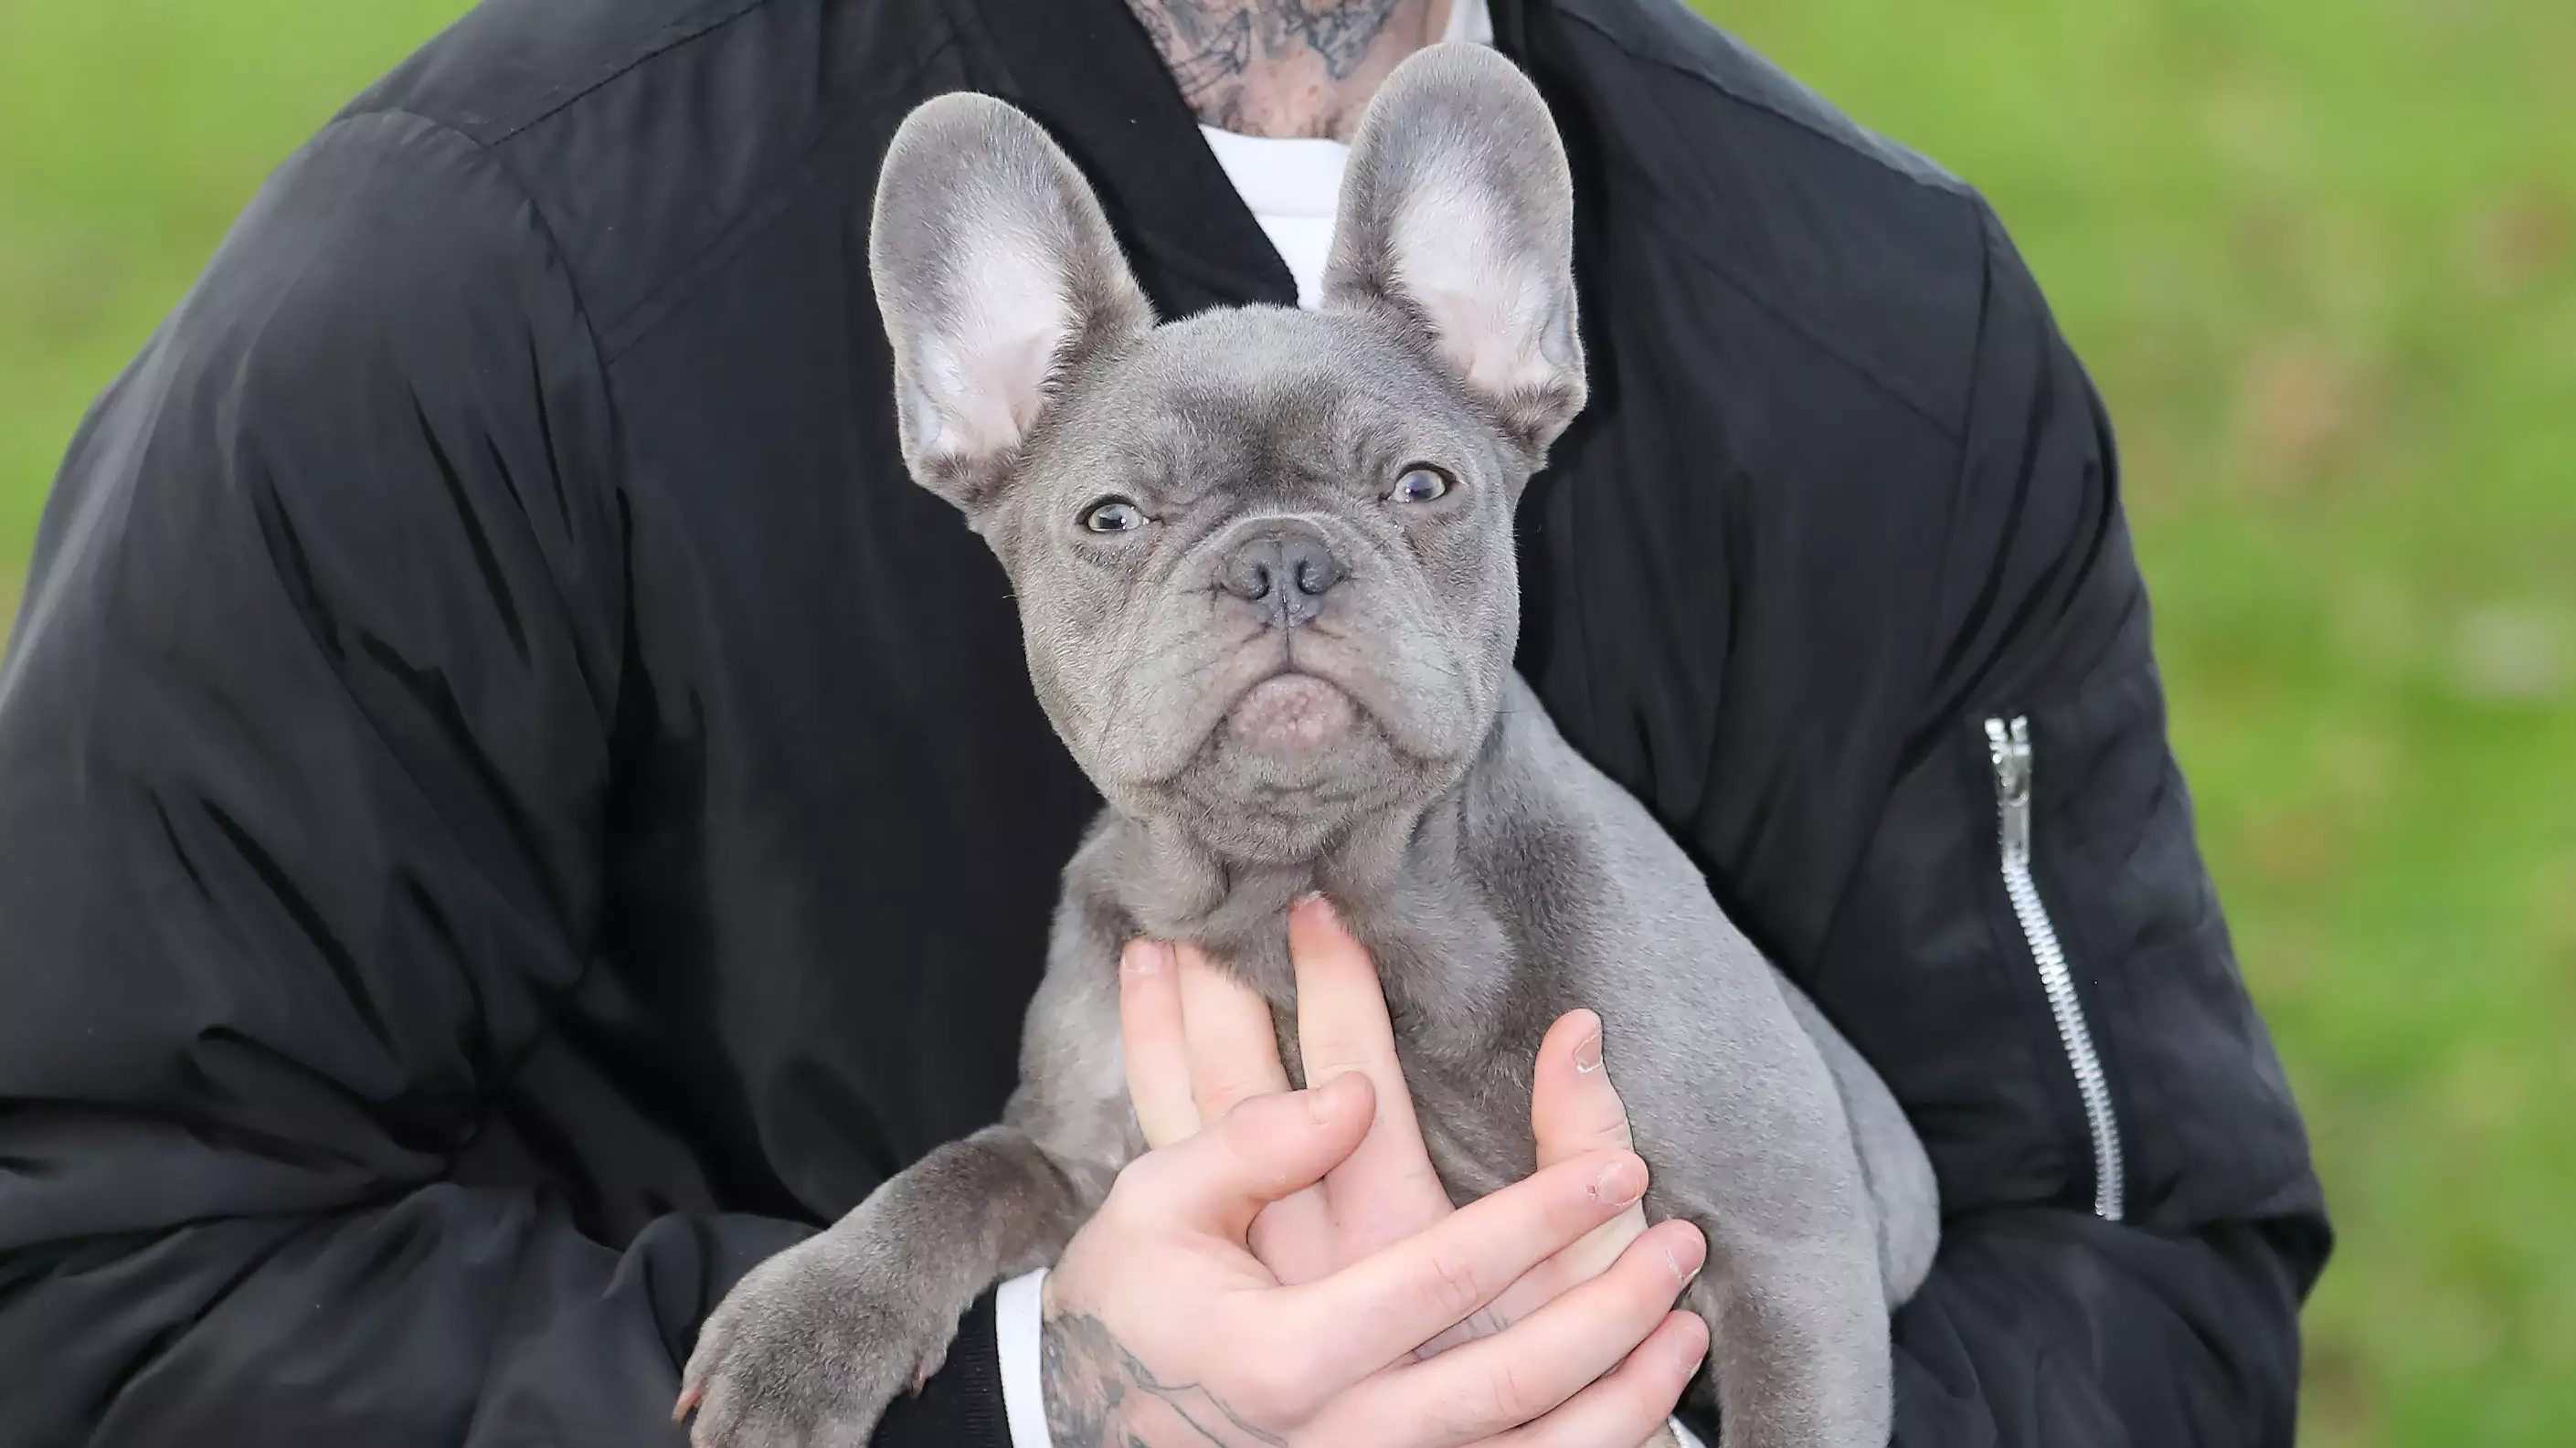 20-Year-Old Man Stabbed By Thief Trying To Steal His French Bulldog